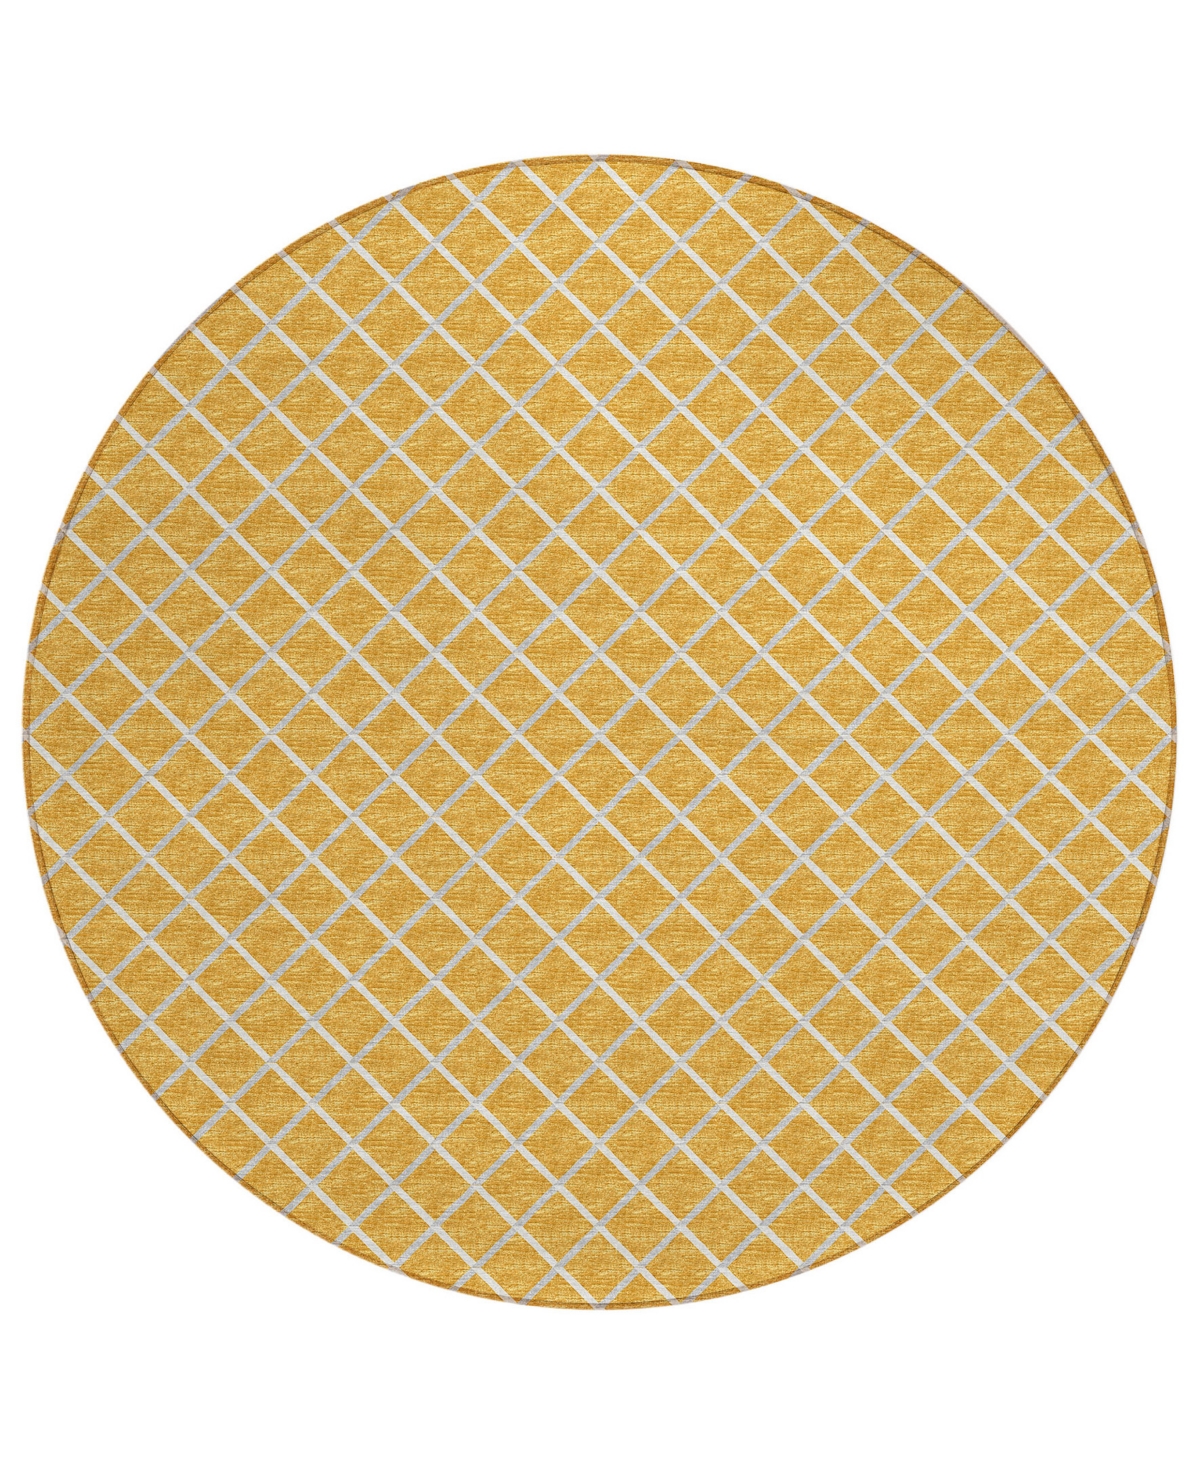 D Style Victory Washable VCY1 10' x 10' Round Area Rug - Gold